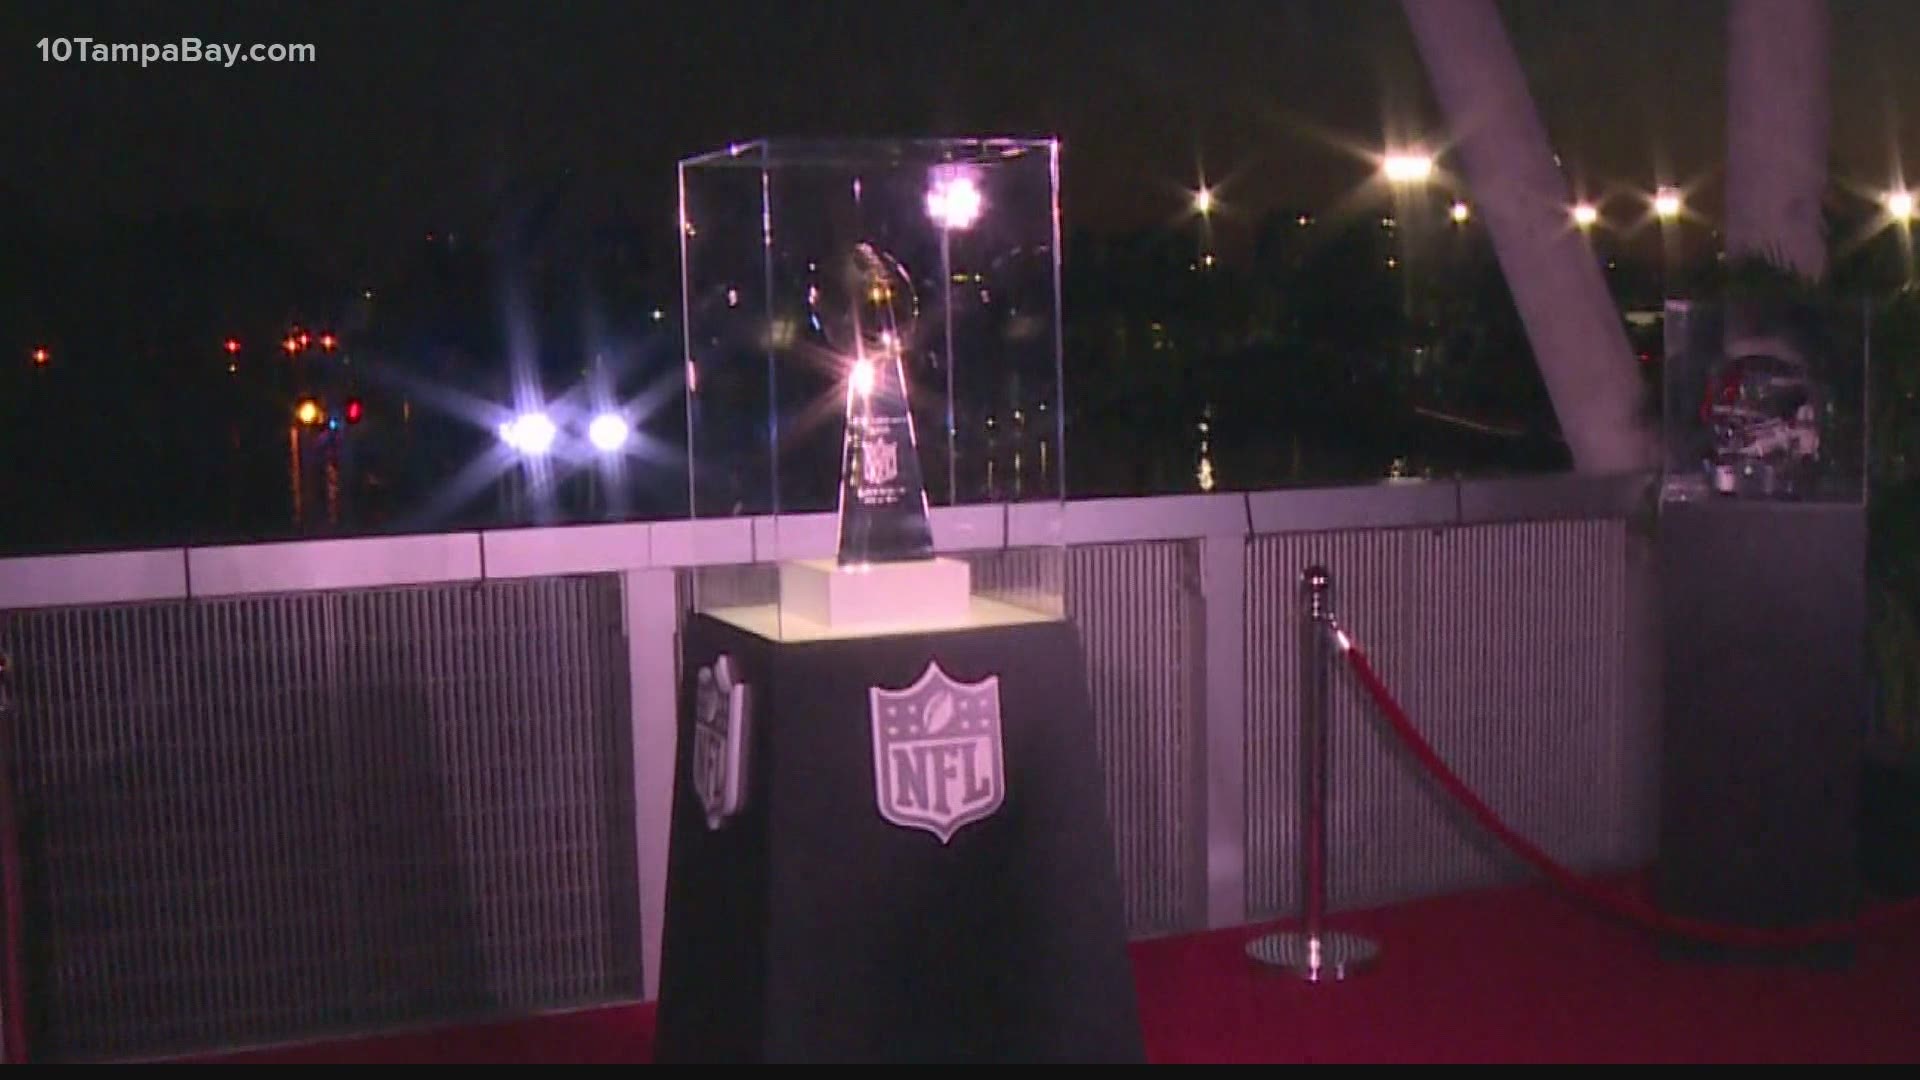 It will be on display at the Super Bowl Experience through Feb. 6.